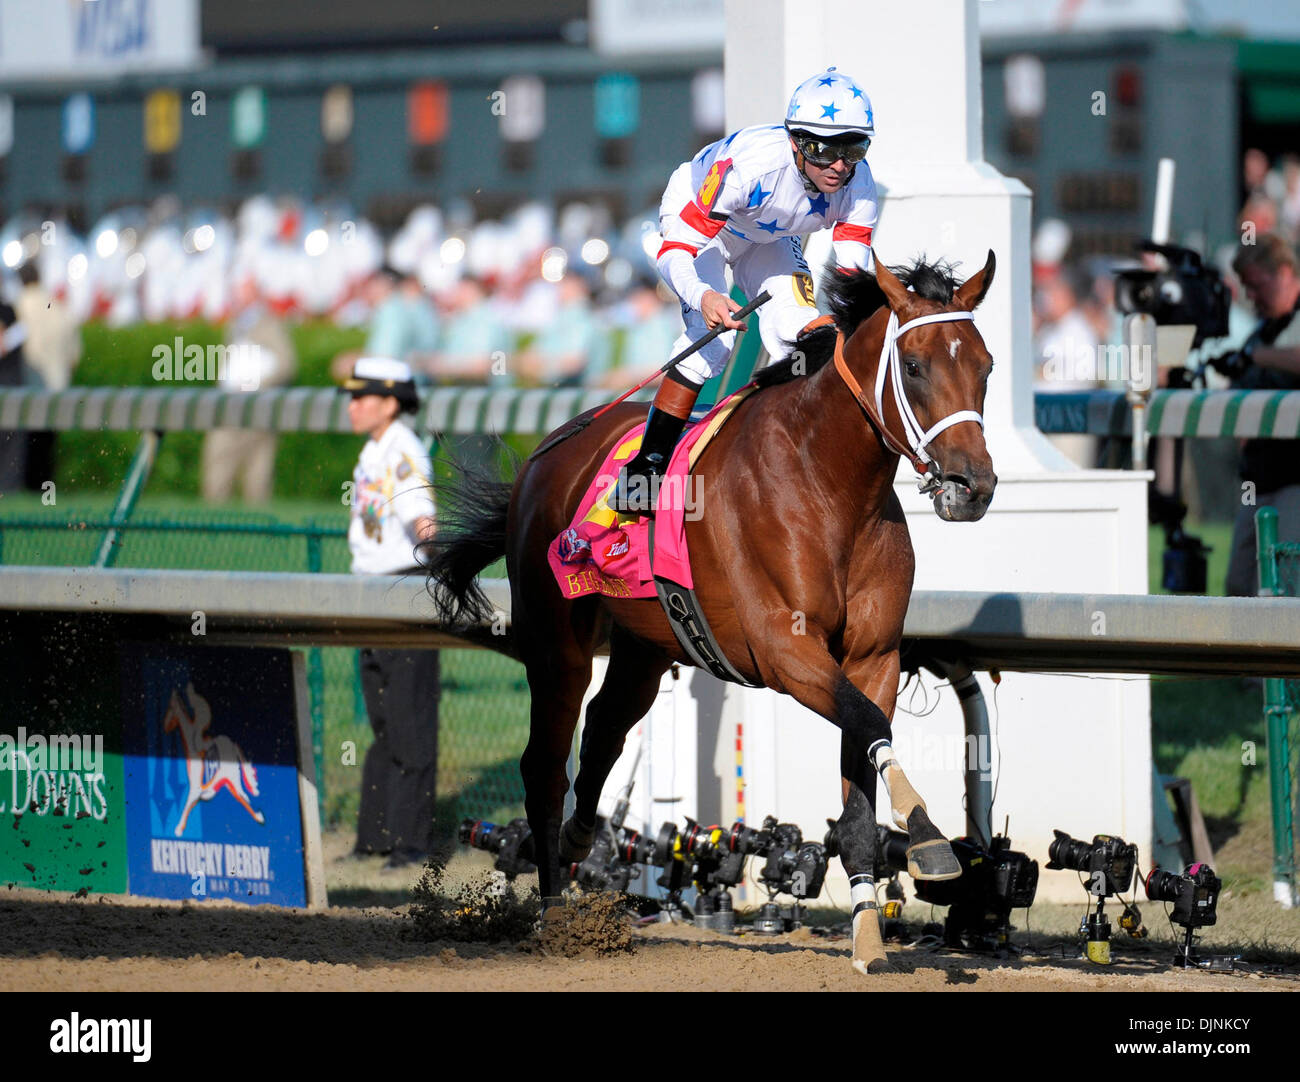 Big Brown with Kent Desormeaux up crossed the finish line to win the 134th Kentucky Derby.  Big Brown #20 with Kent Desormeaux up won the 134 Kentucky Derby with Eight Belles #5 with Gabriel Saez up was second and Denis of Cork #16 with Calvin Borel up was third in the 134th running of the Kentucky Derby Saturday May 3, 2008, at Churchill Downs, Louisville, Ky. Photo by Ken Weaver  Stock Photo